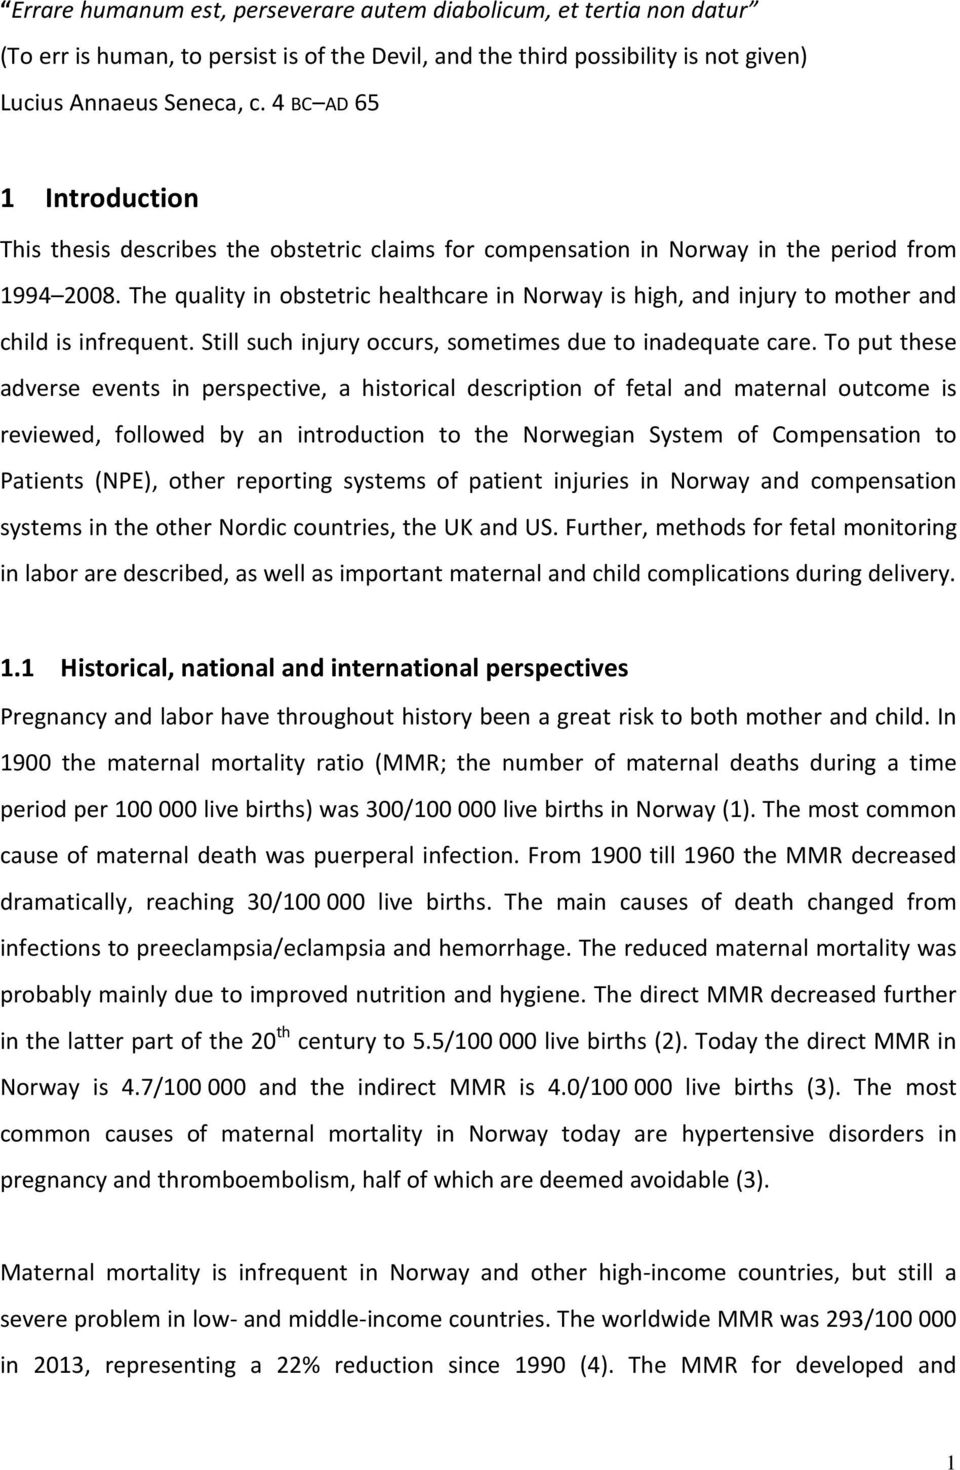 The quality in obstetric healthcare in Norway is high, and injury to mother and child is infrequent. Still such injury occurs, sometimes due to inadequate care.